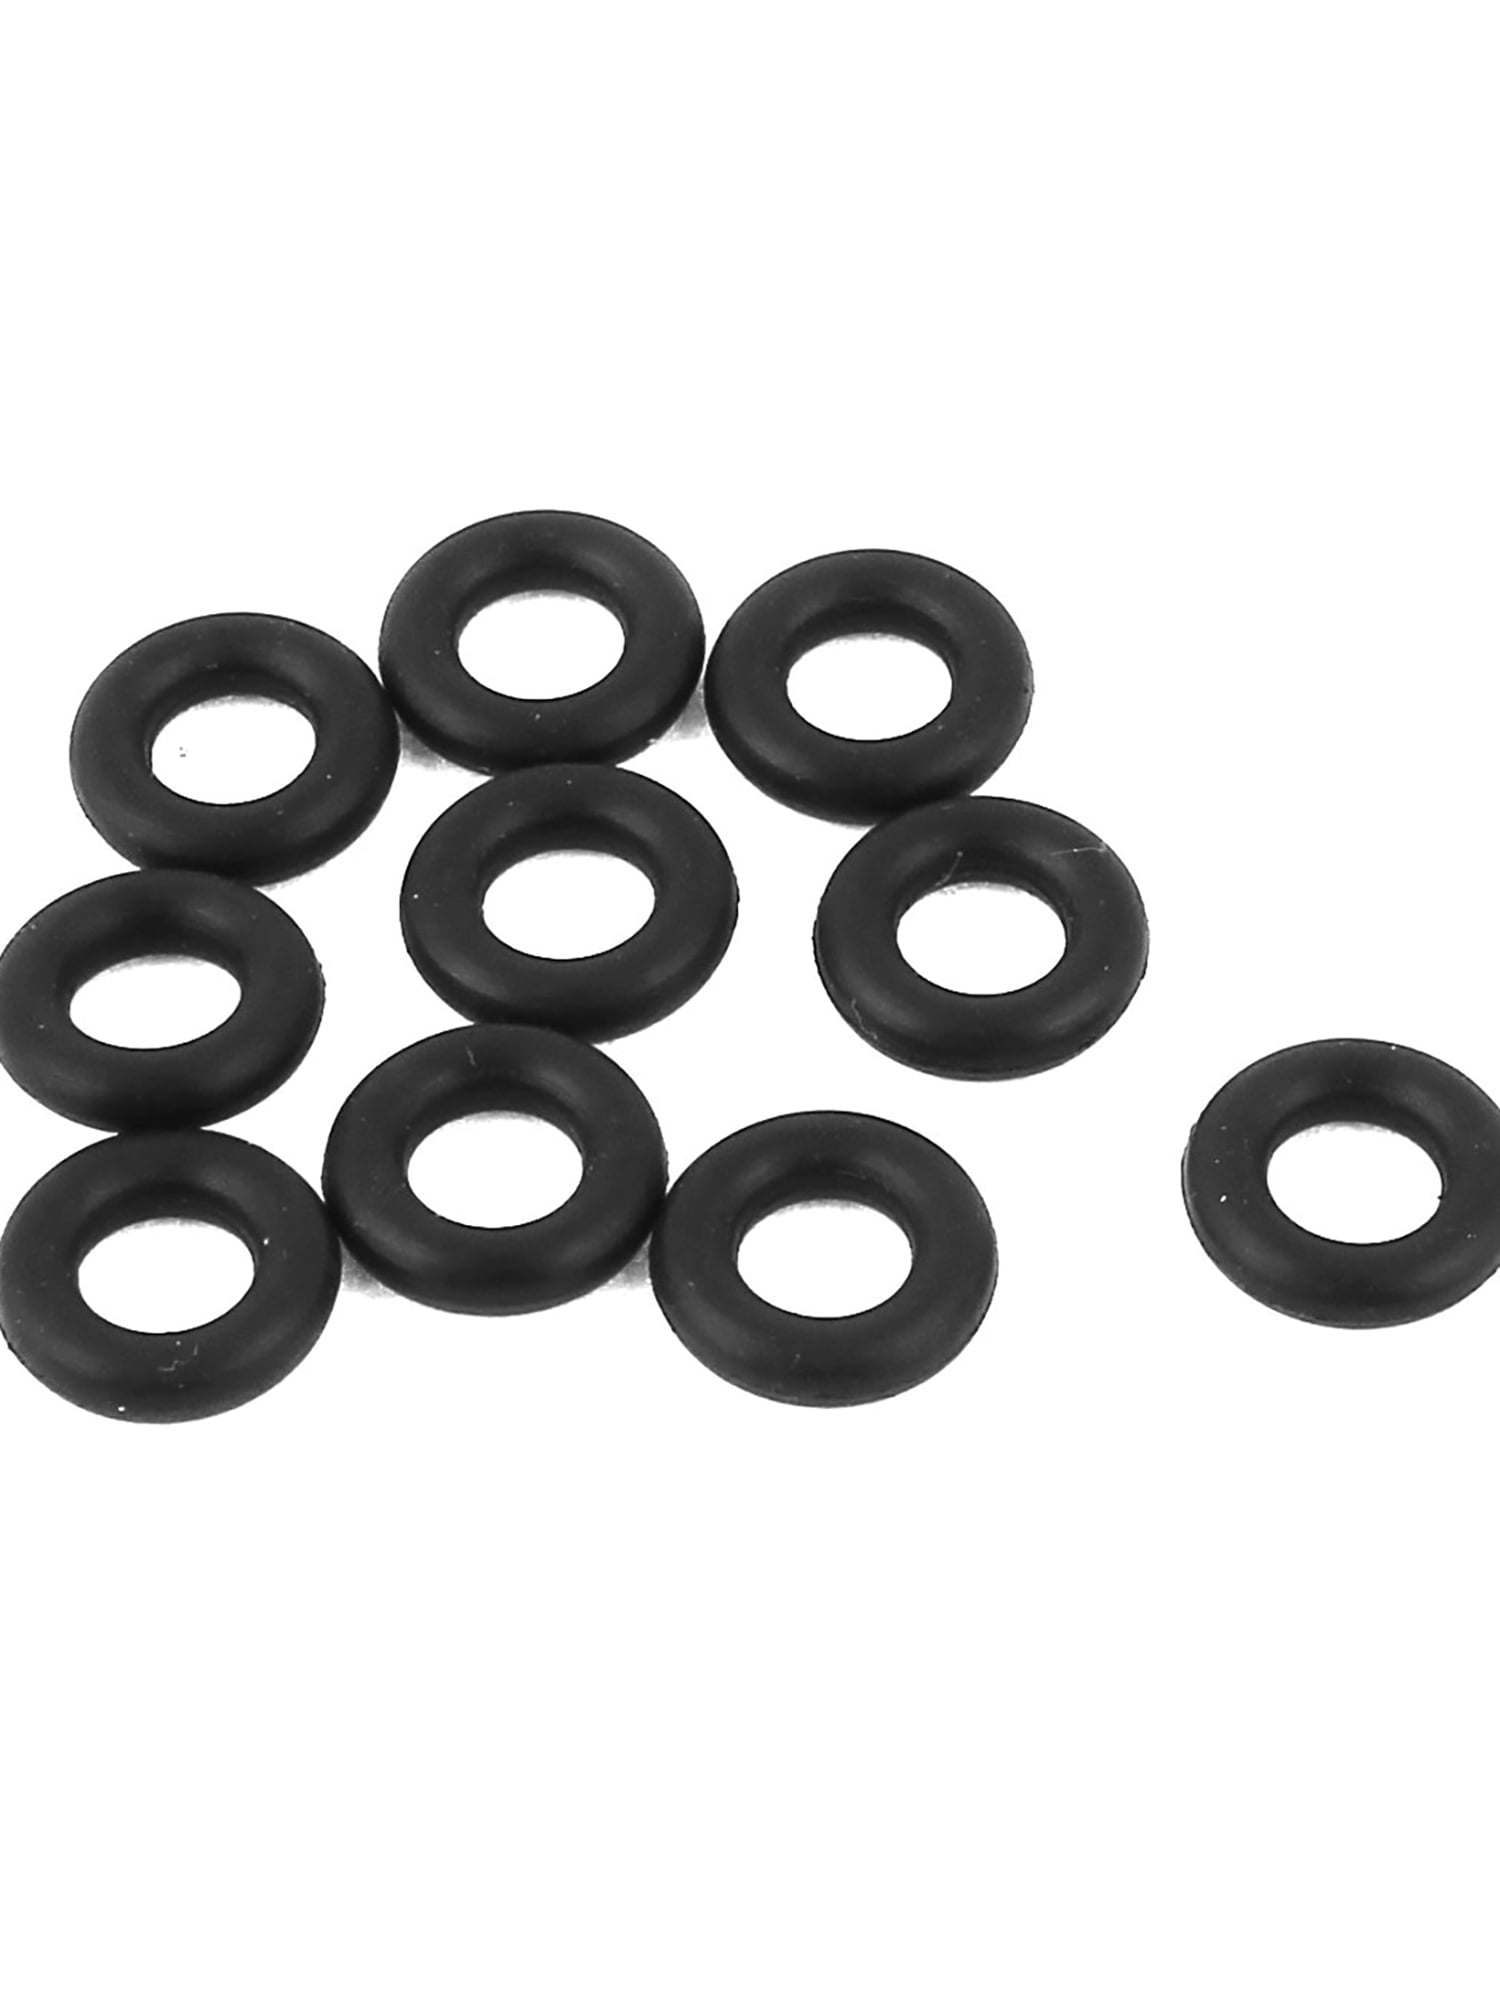 50X rubber silicones O rings tip gasket grip washer grommets for shafts dart LU 